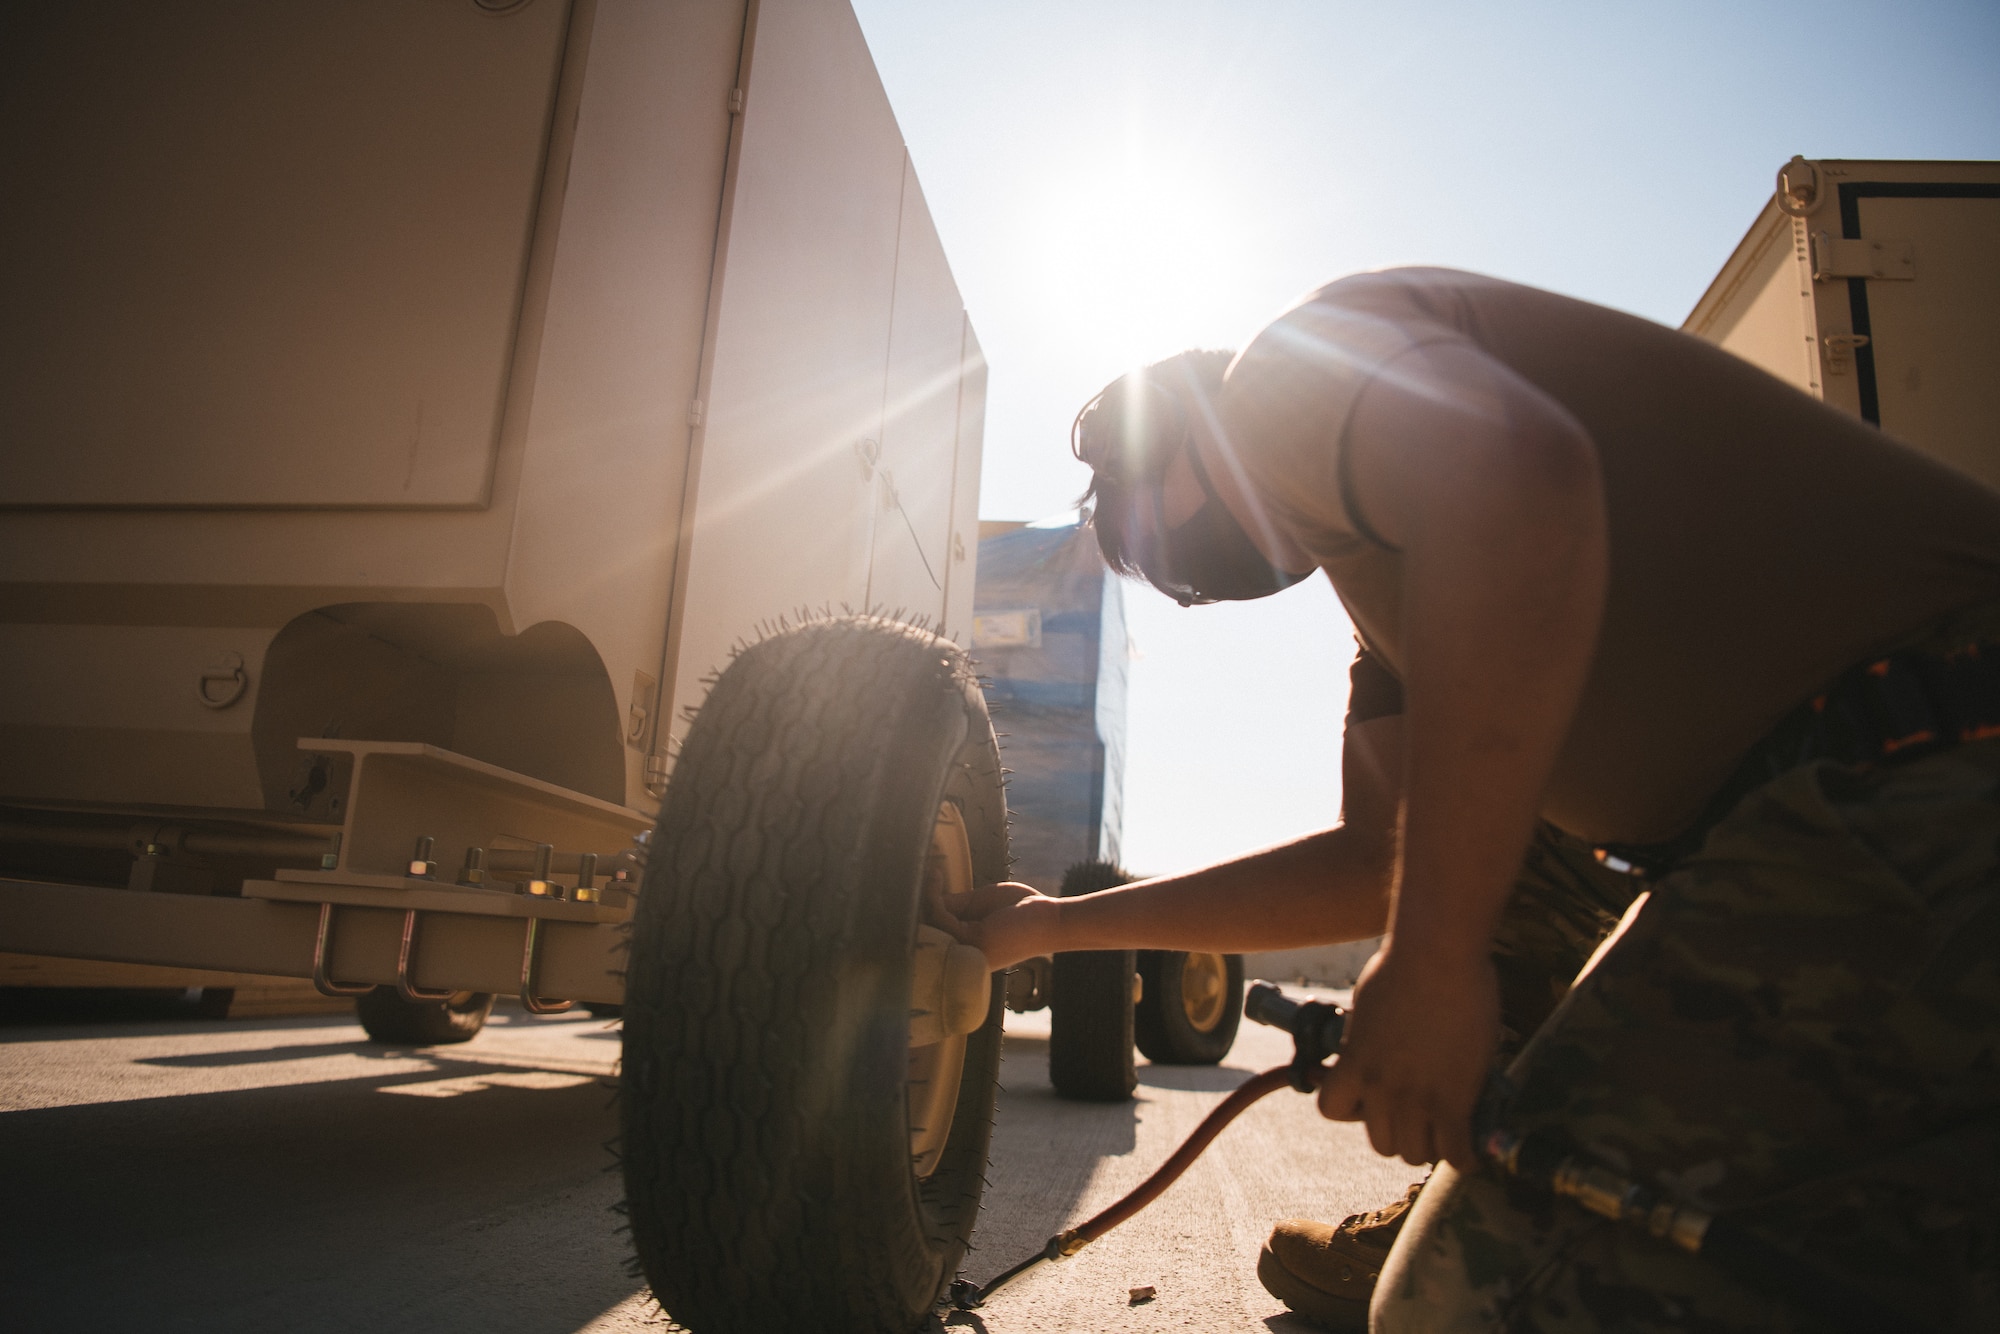 Senior Airman Orivin, 432nd Aircraft Maintenance Squadron weapons load crew member, is lit from the sun from behind as he fills a tire with air.